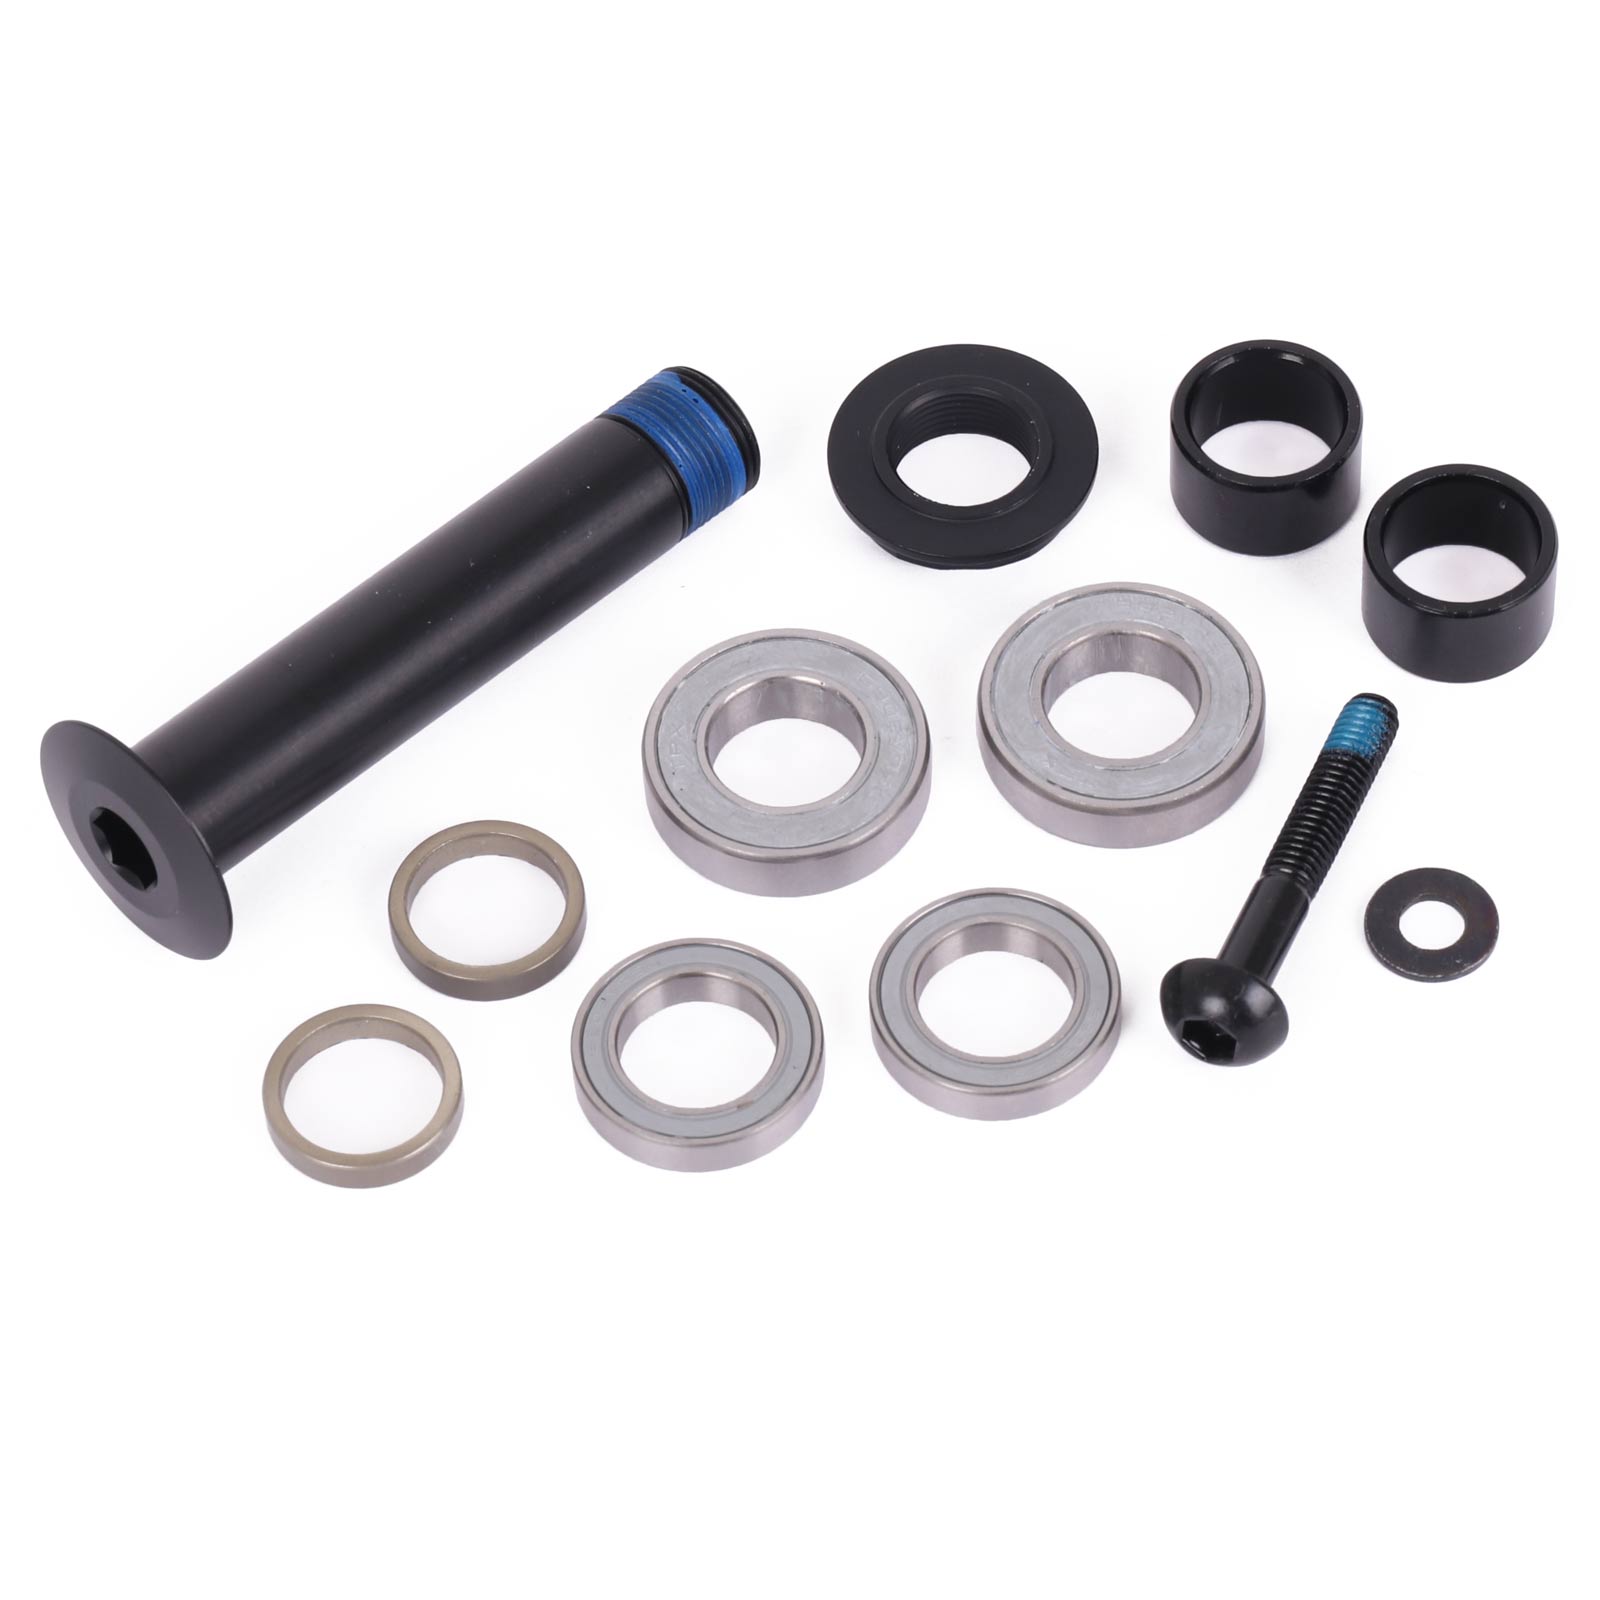 Image of Giant GSF032 Rear Shock Accessories for Stance / Embolden | Shock Bolt Kit - 1280GSF03201A1